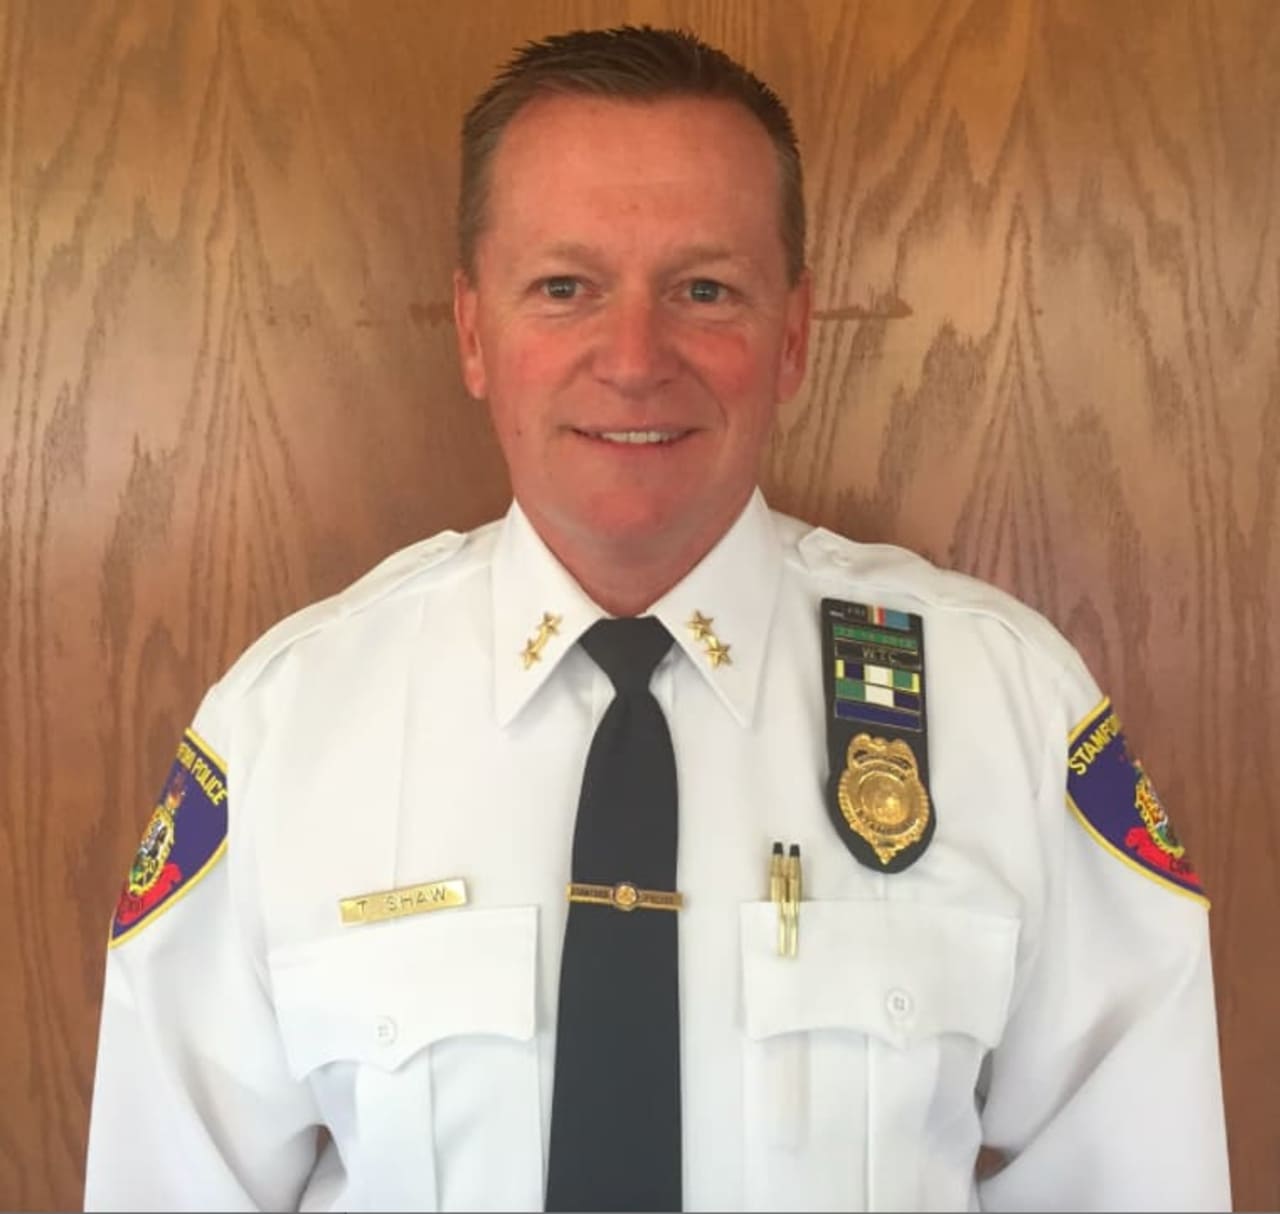 Easton's Police Chief Timothy Shaw came to the job after serving as Assistant Chief at the Stamford Police Department.